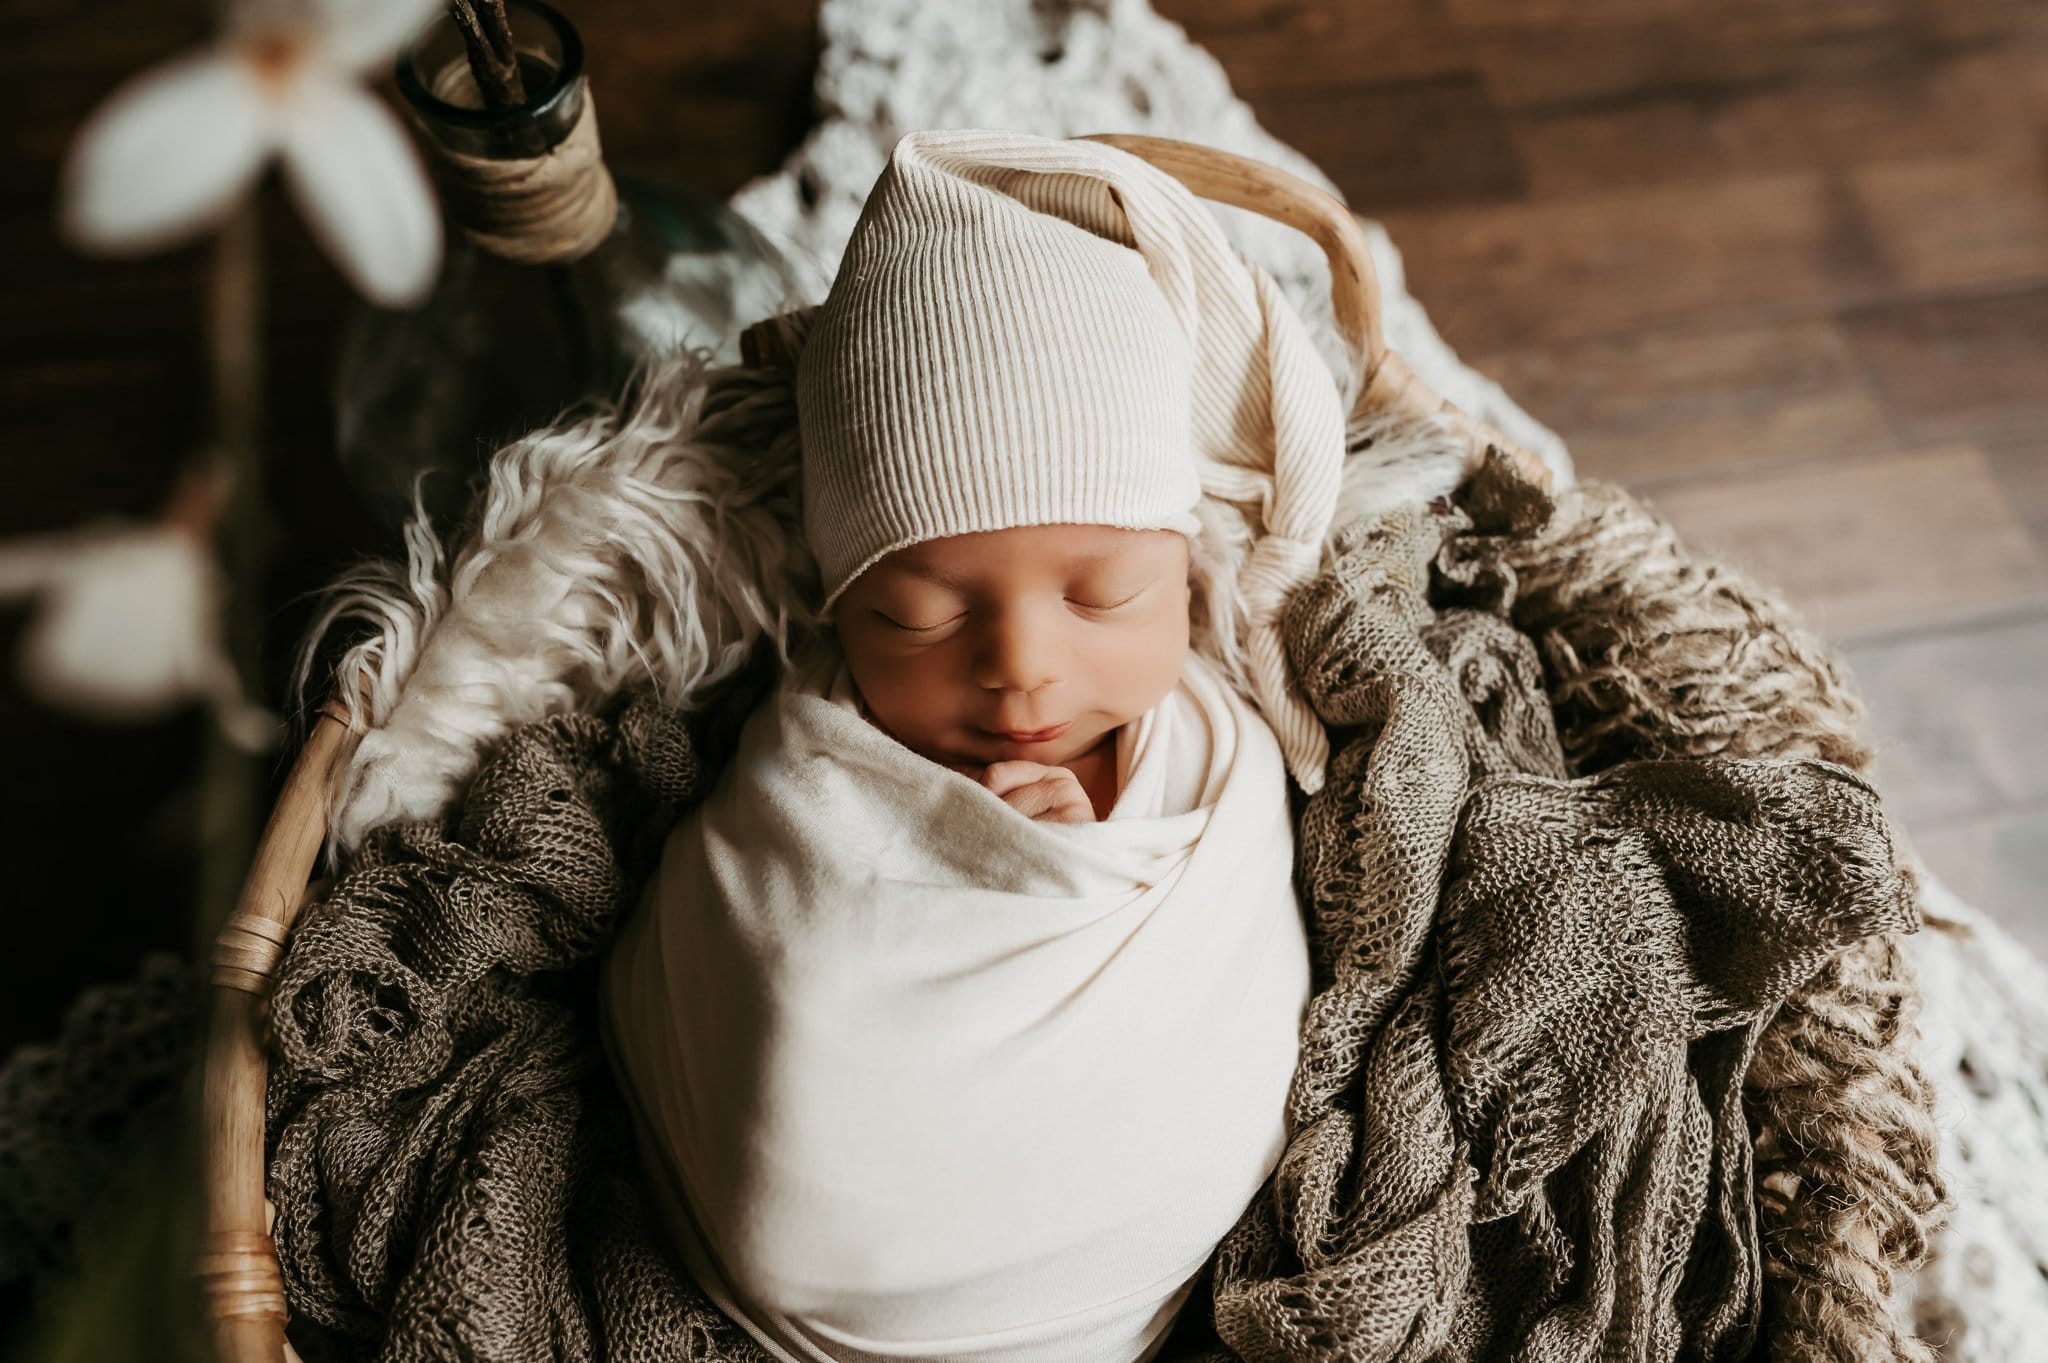 Newborn baby posed in basket with furr neutral colors